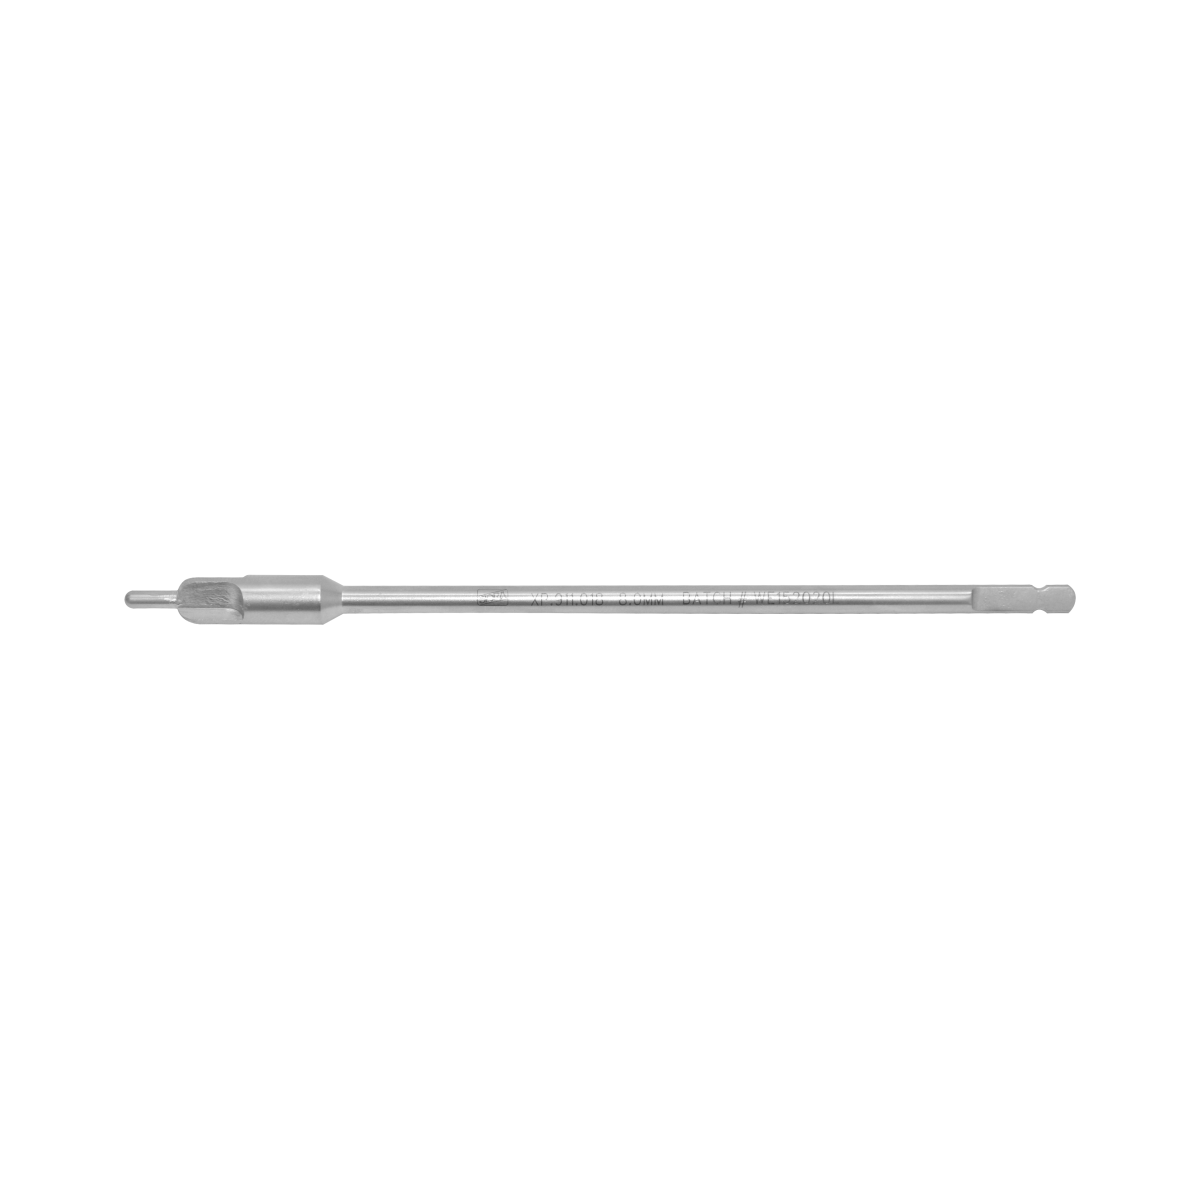 Counter Sink, Q.C. End 8.0mm Head (for 4.5-6.5mm Screws)